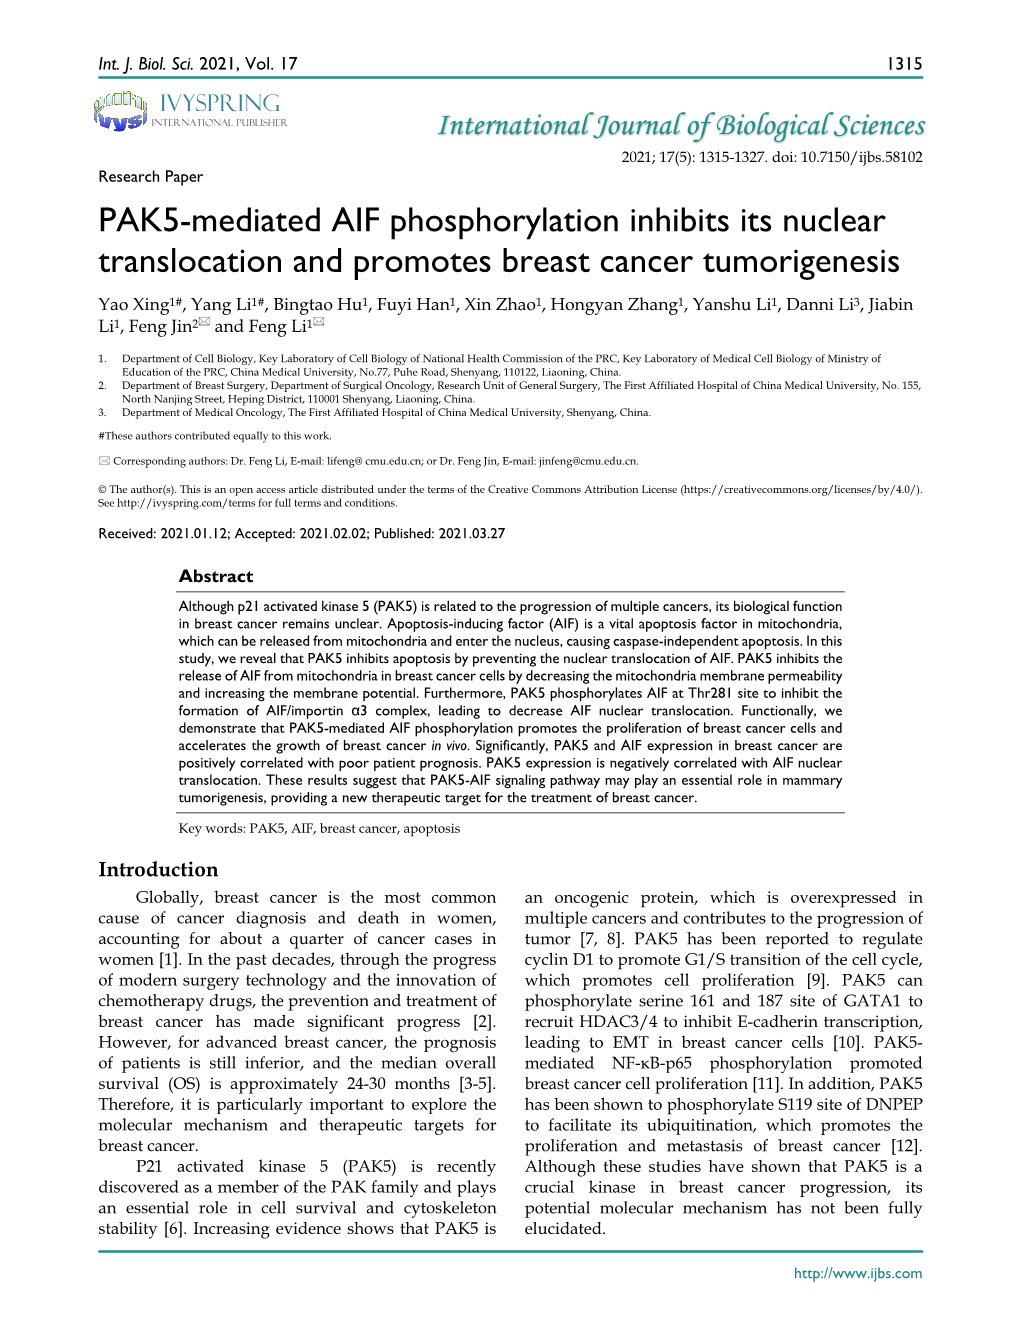 PAK5-Mediated AIF Phosphorylation Inhibits Its Nuclear Translocation And